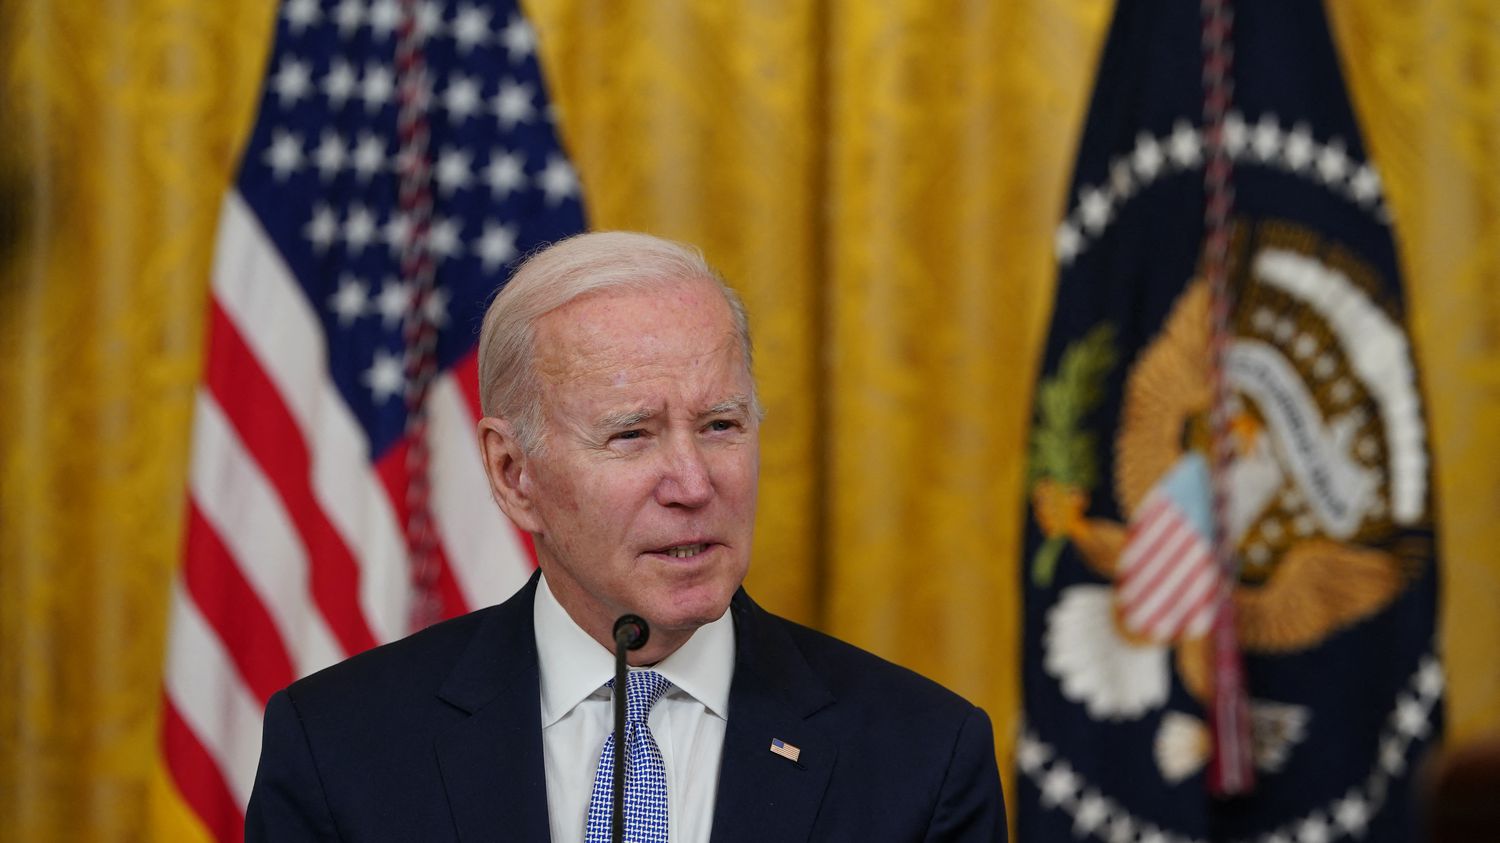 United States: Joe Biden's seaside residence searched, no confidential document found
